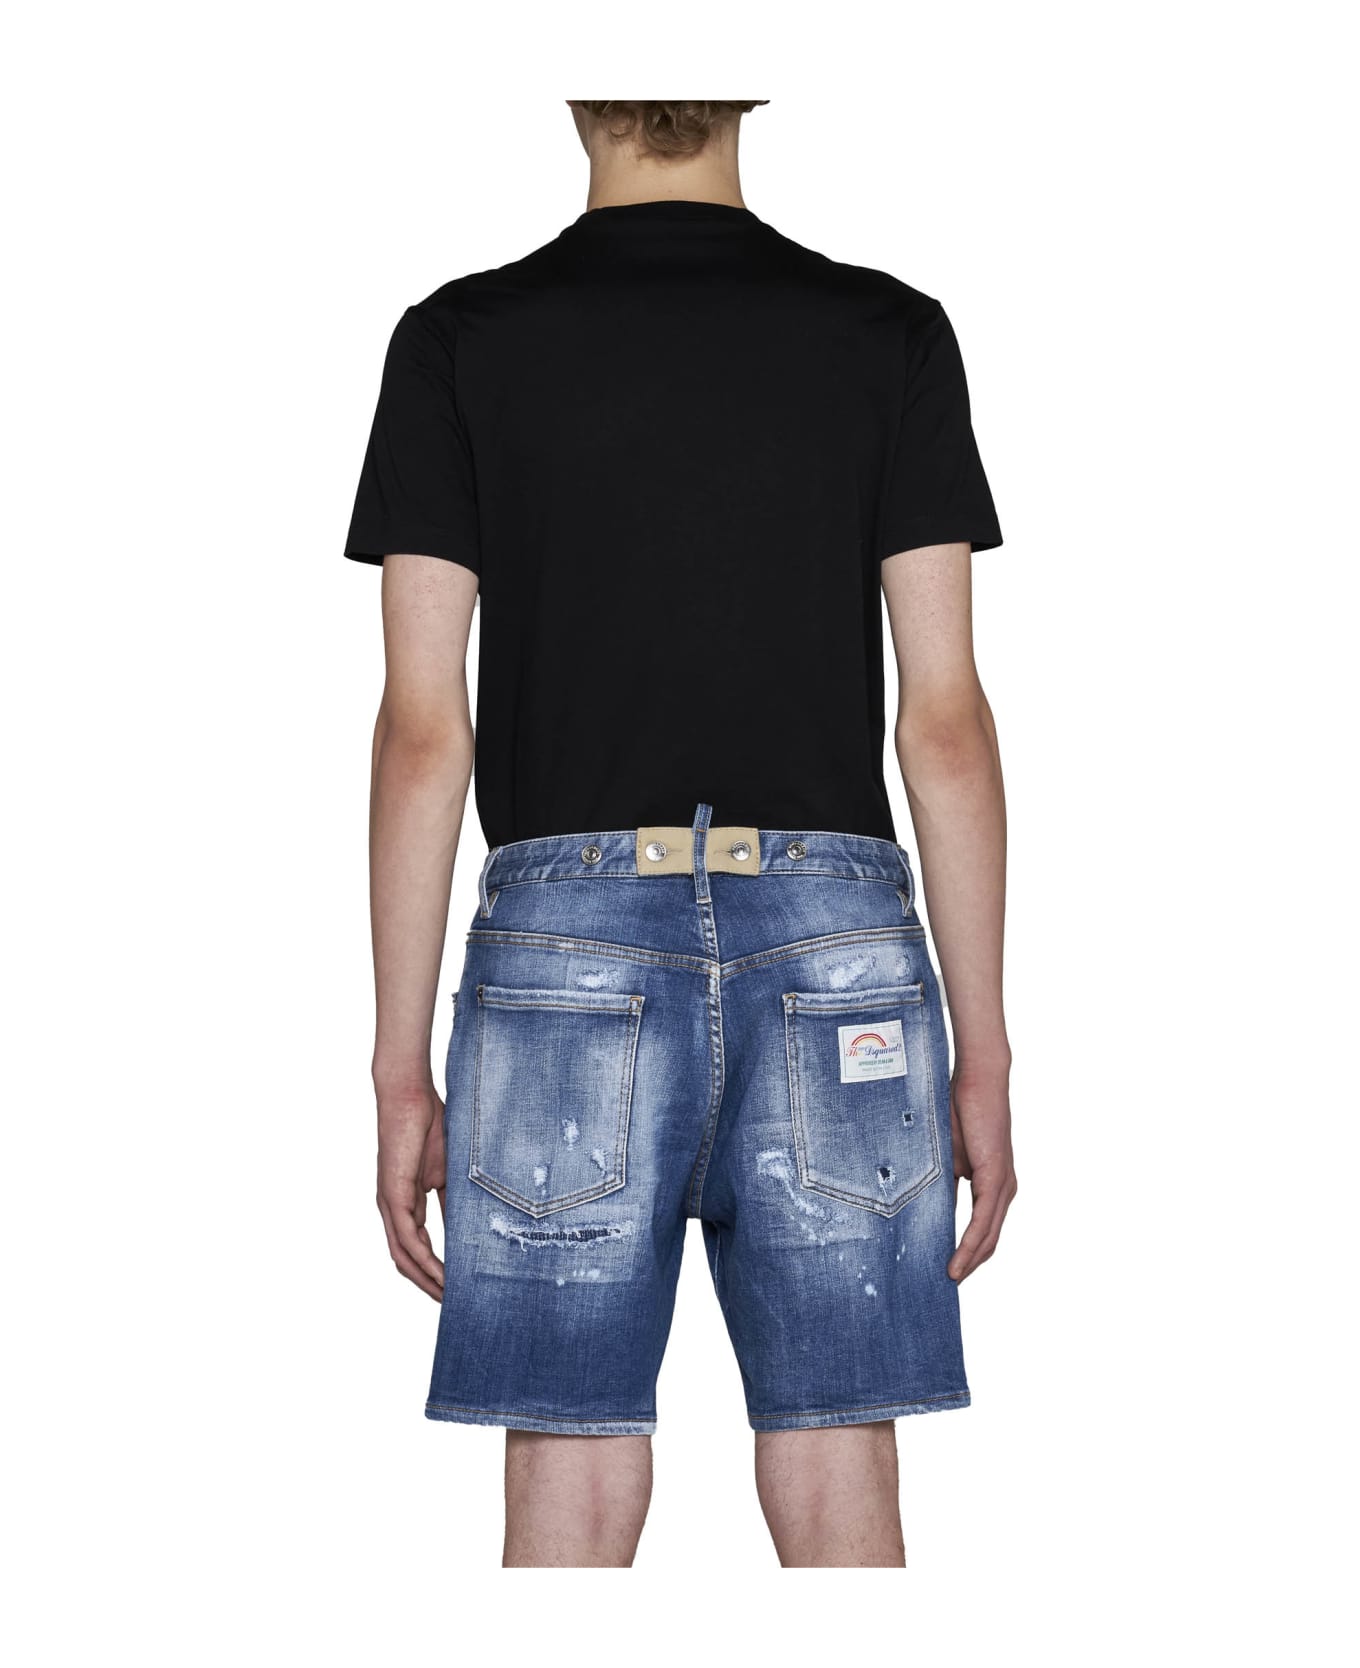 Dsquared2 Shorts - Navy blue